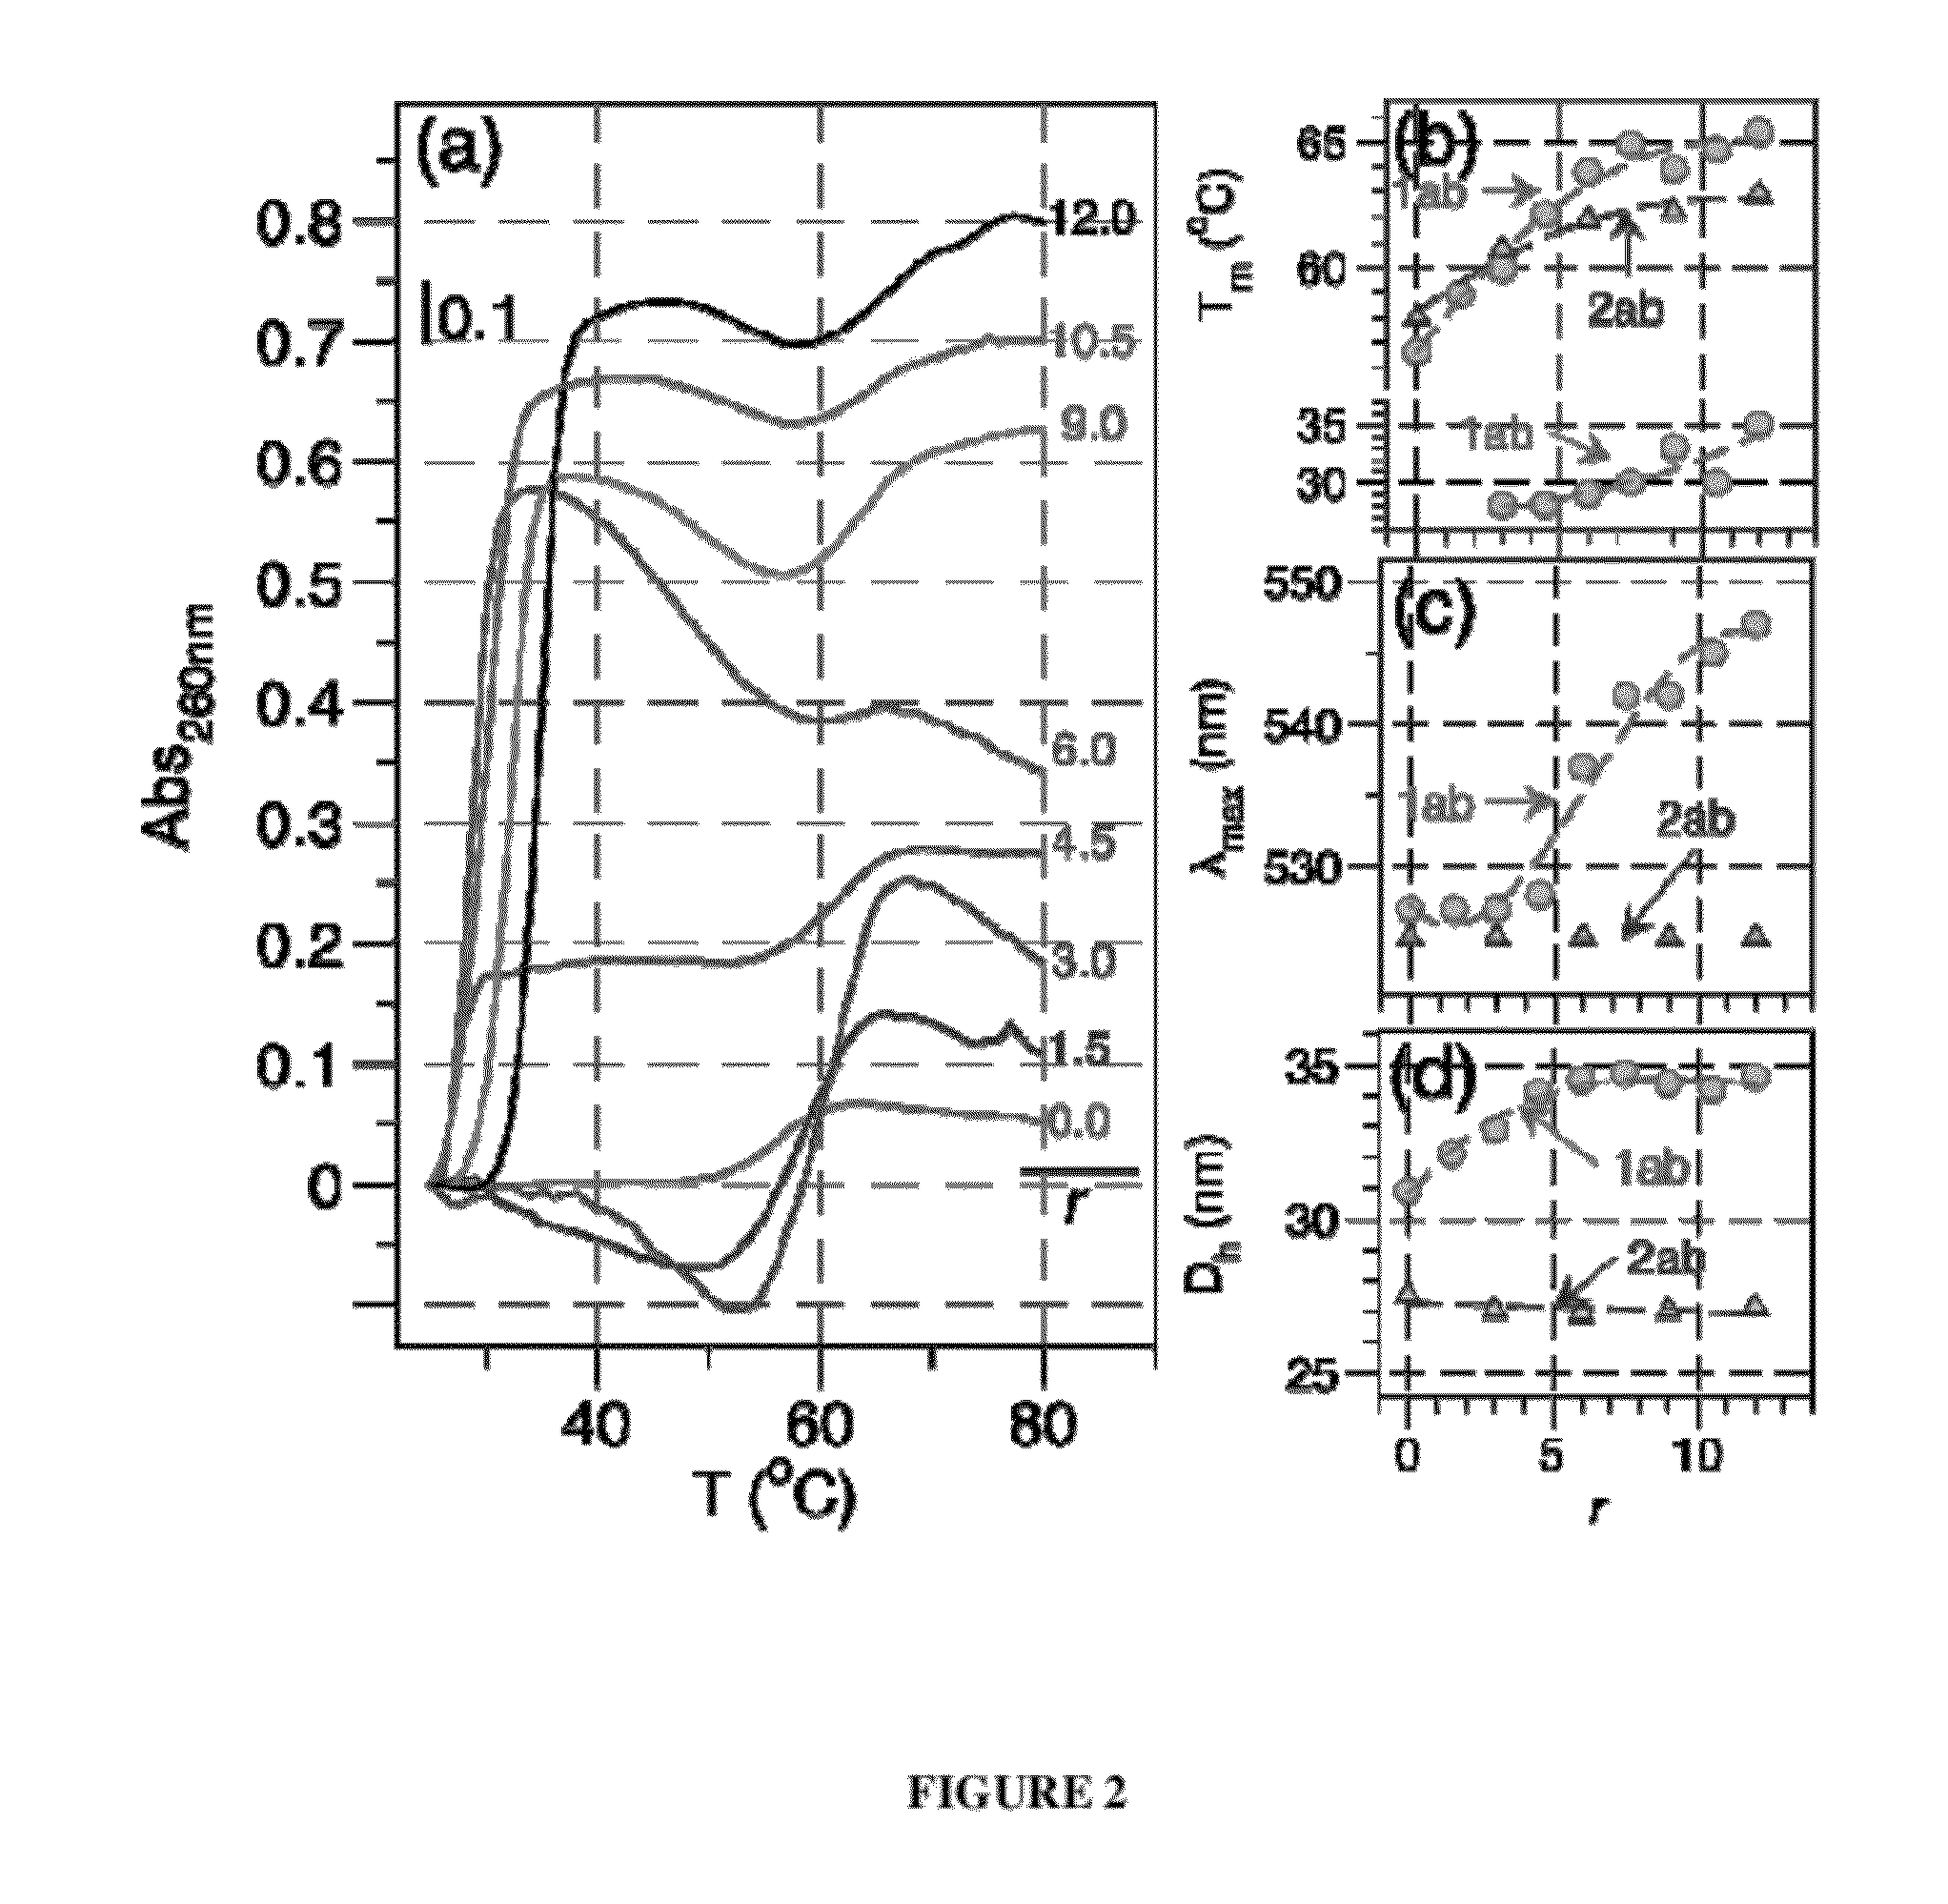 System and method for delivery of dna-binding chemotherapy drugs using nanoparticles